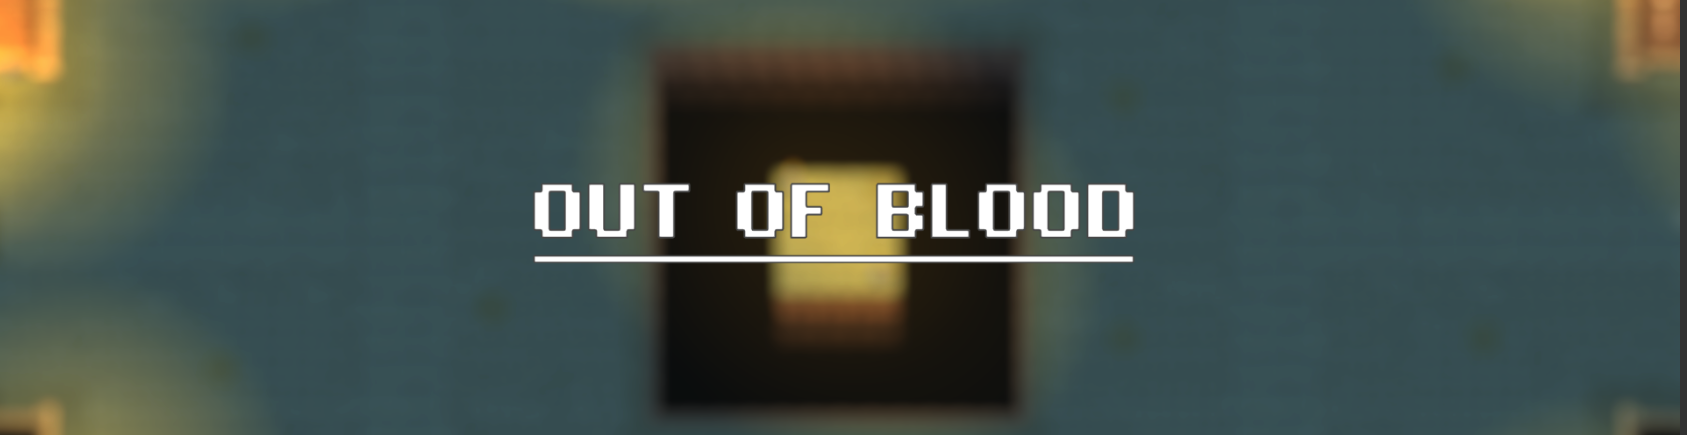 Out of blood